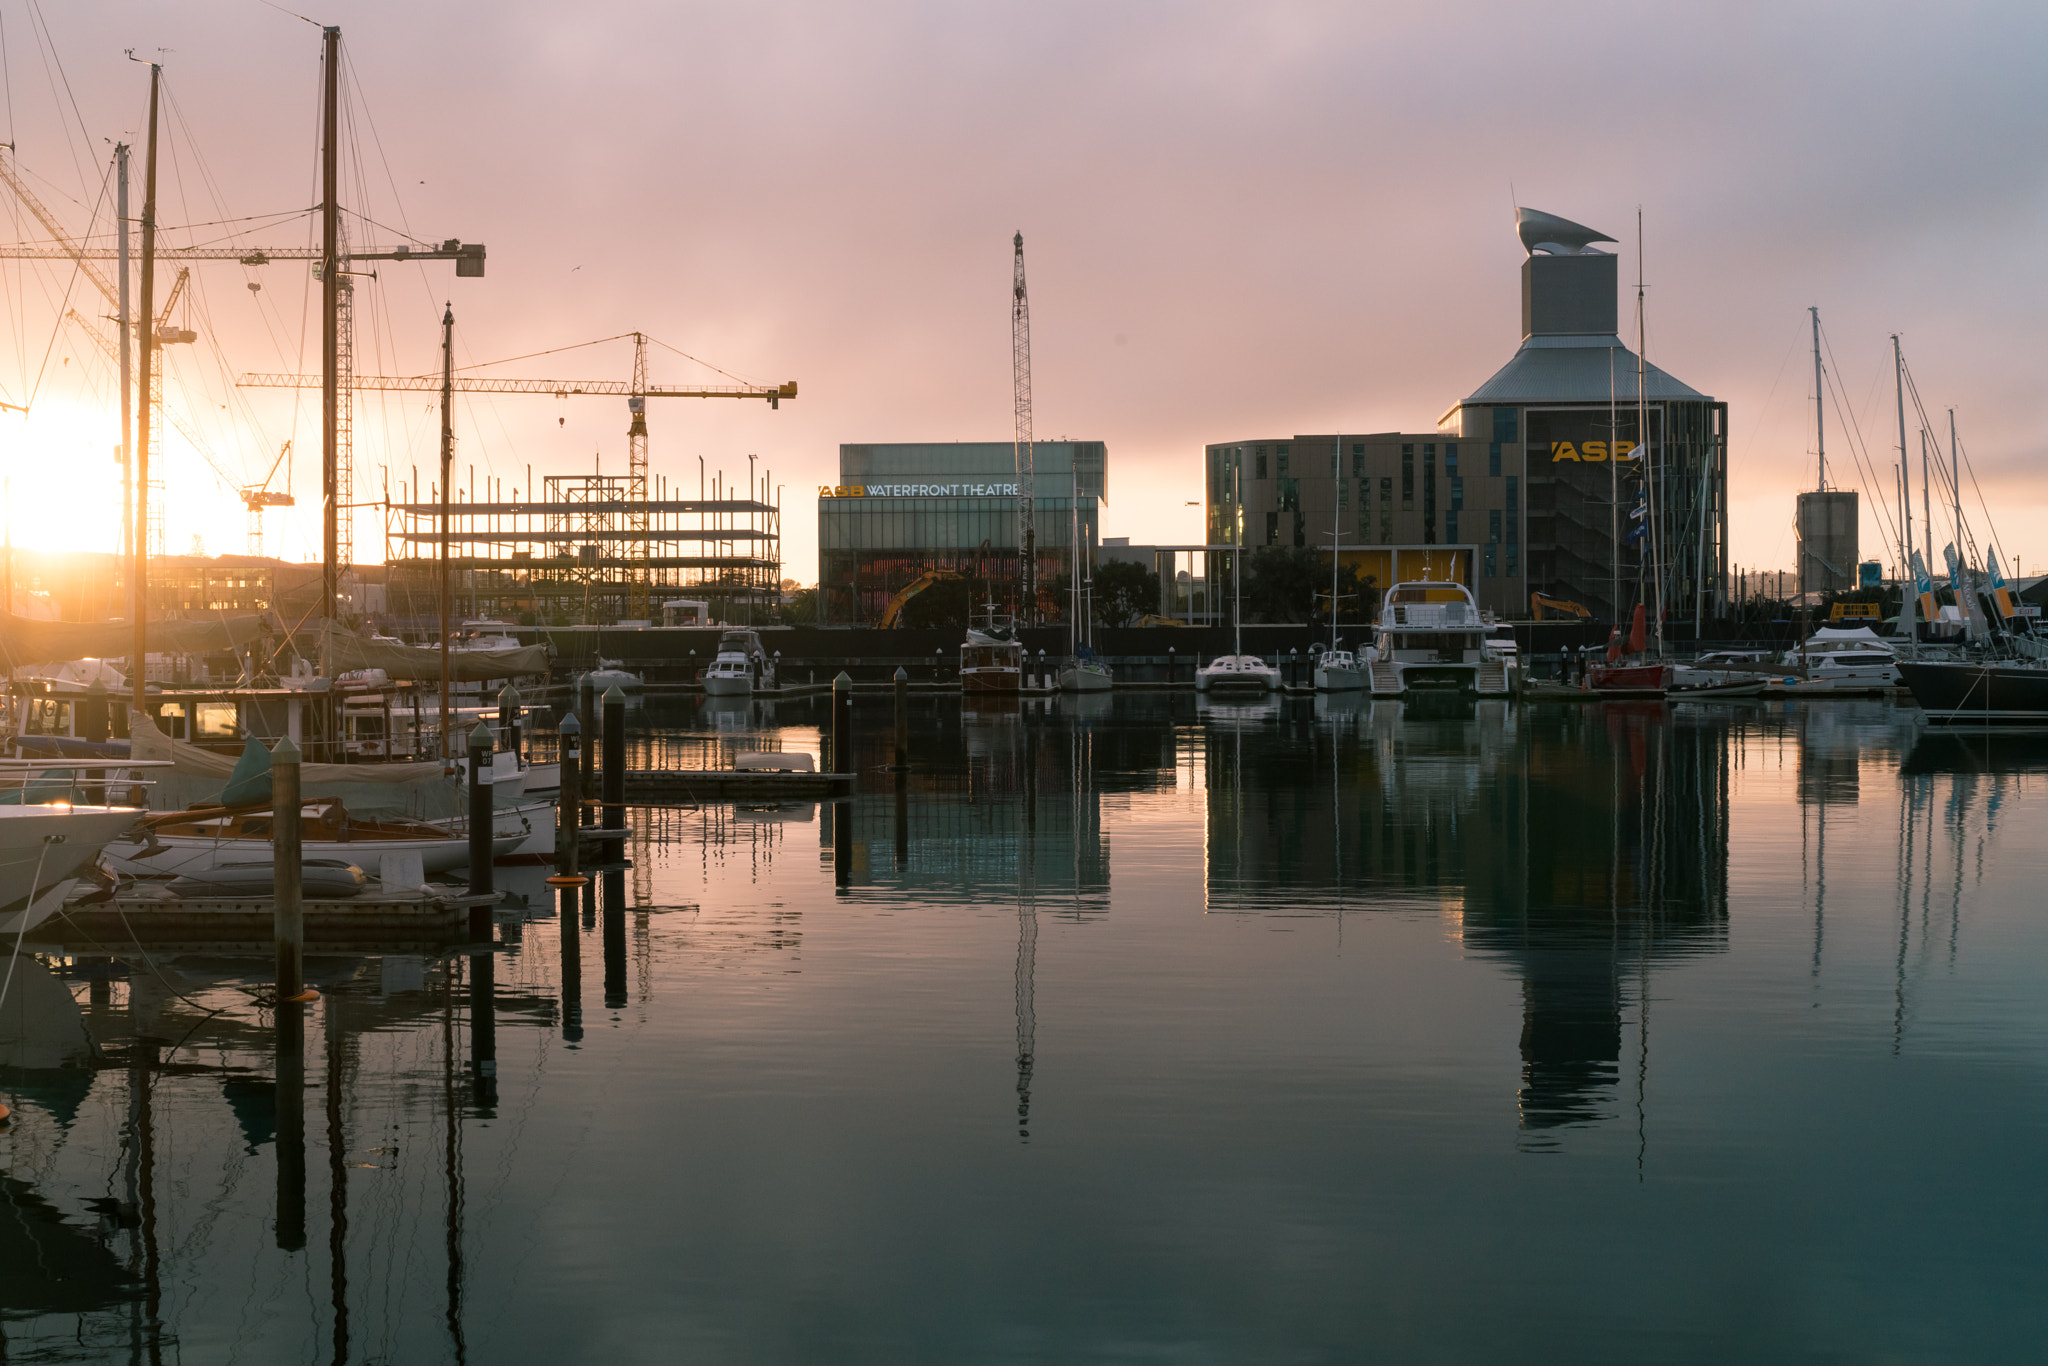 Sony a7R II sample photo. Sunset over viaduct harbour photography